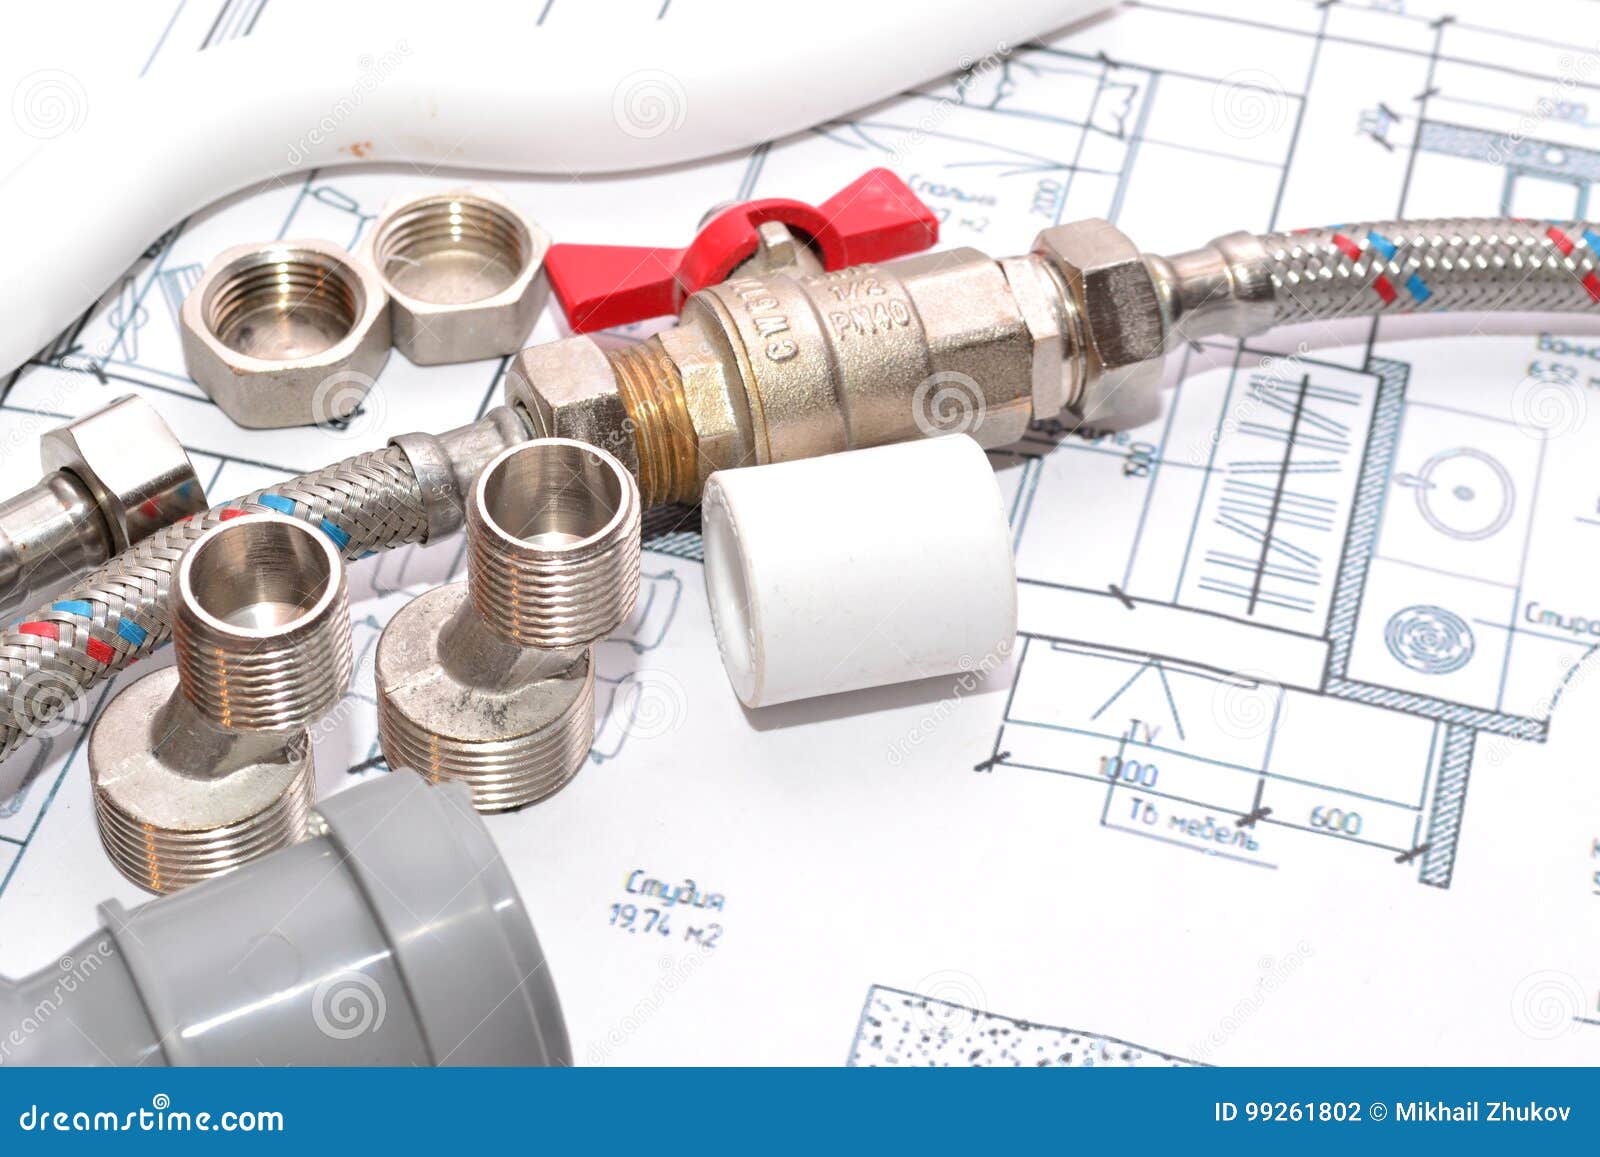 Replacement Of Plumbing Accessories Stock Photo Image Of